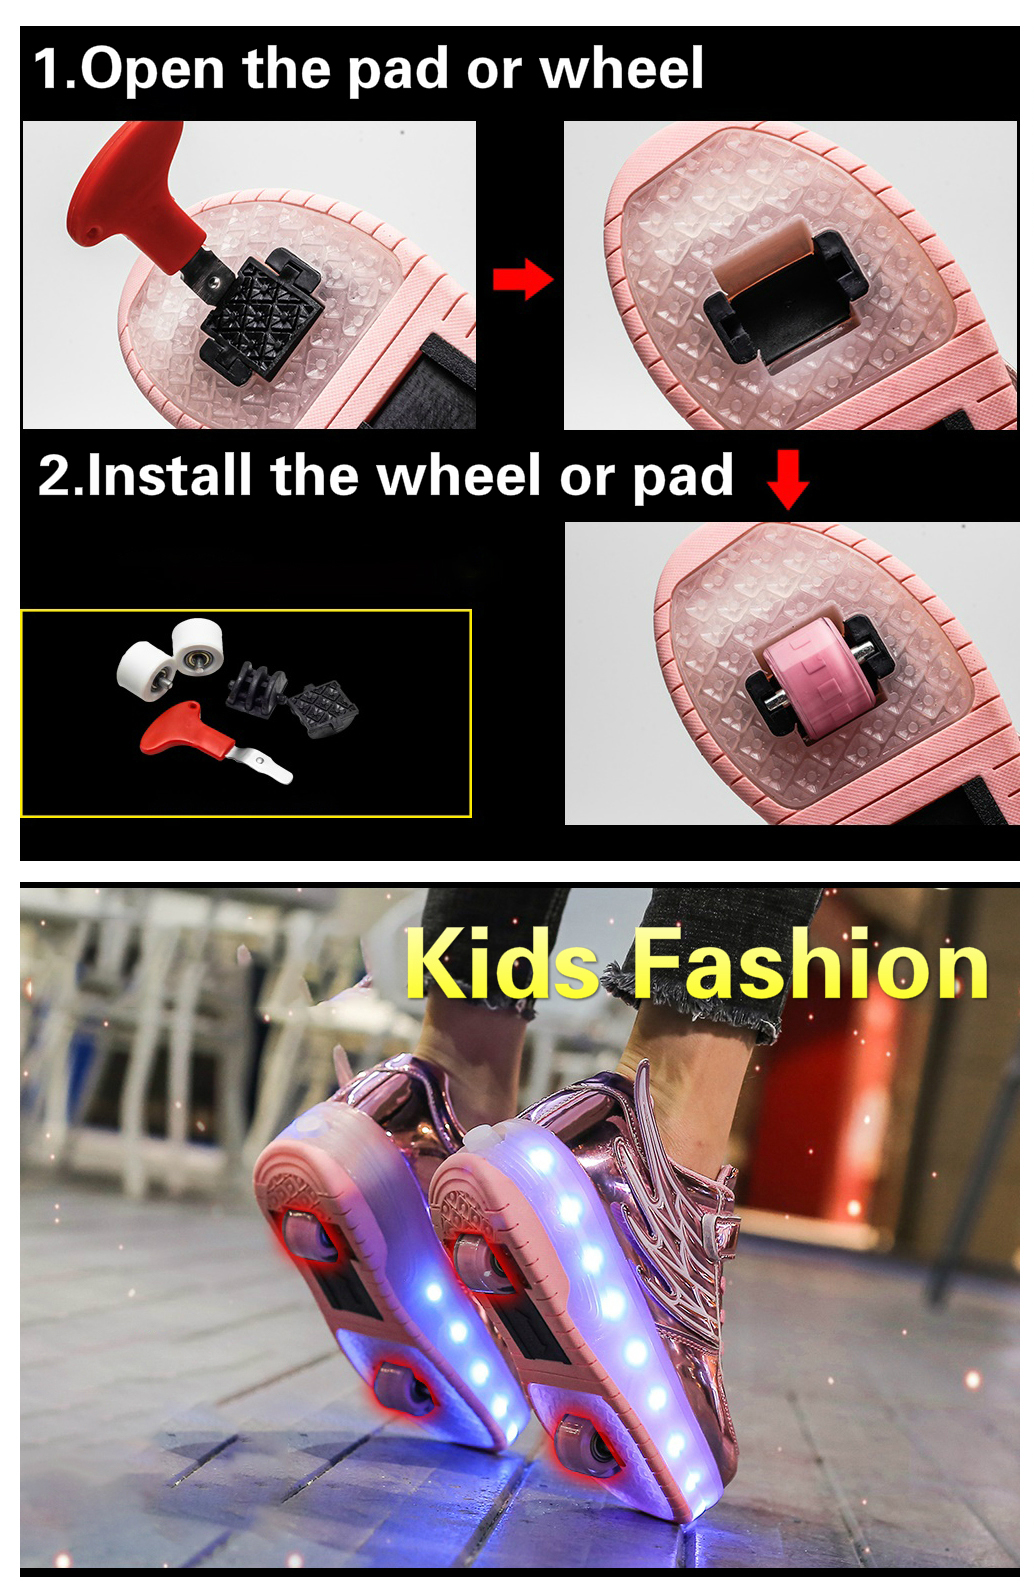 LED Kids Light Up Shoes Fashion Pop Baby Light Up Sneakers Boys